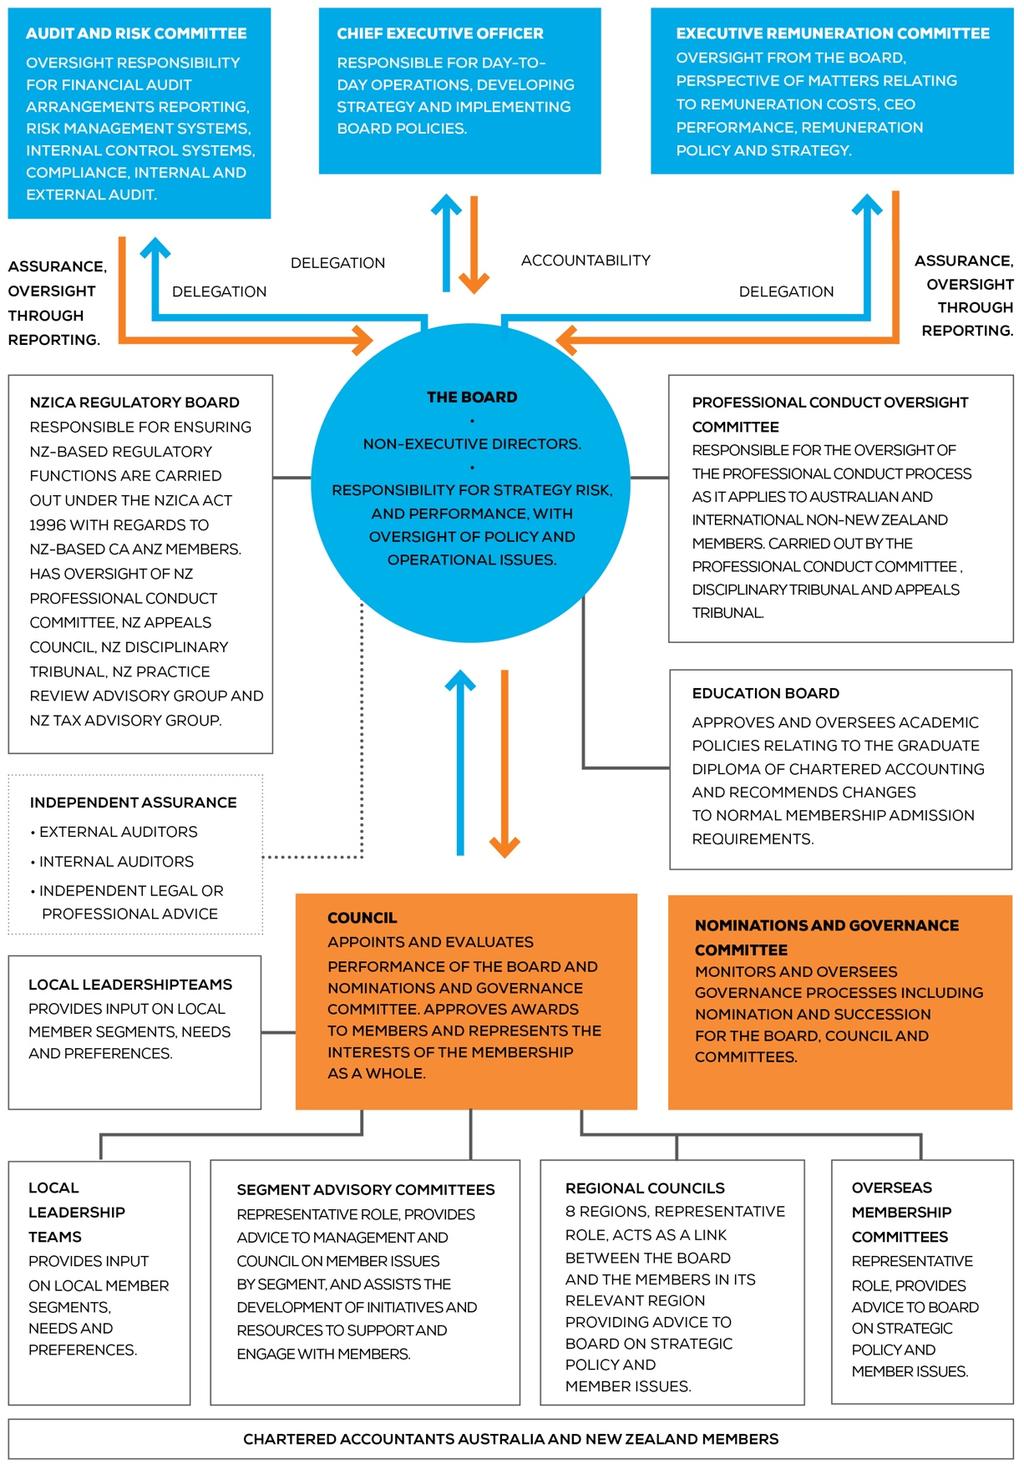 SECTION 2 - GOVERNANCE Chartered Accountants ANZ is governed as shown in the diagram below: The division of roles between Council, Board, Chief Executive Officer and